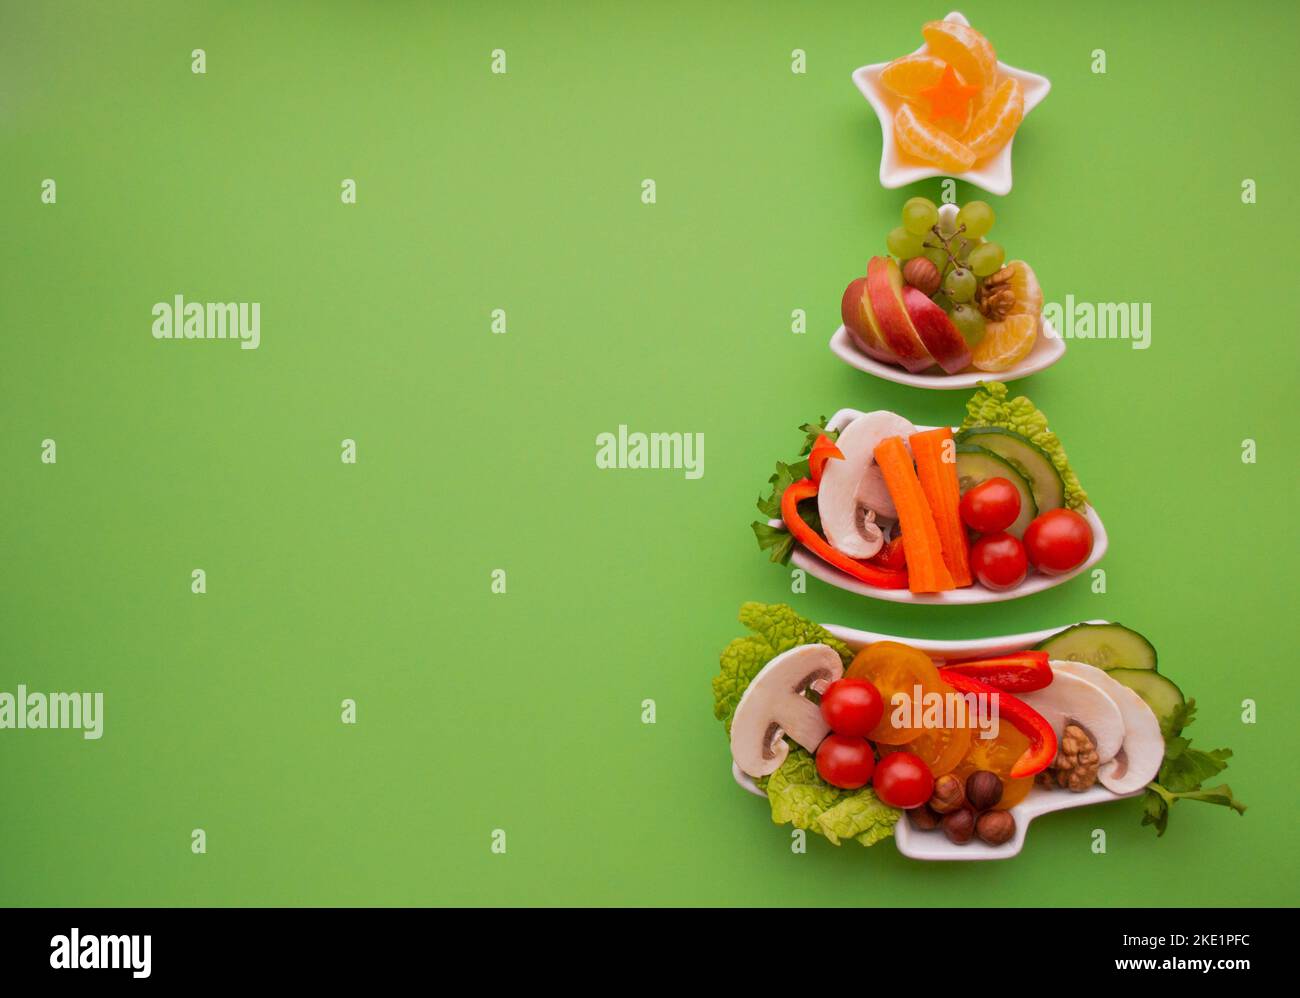 Plate in the form of a Christmas tree with vegetables, fruits, mushrooms and berries.Green background. The concept of vegetarian treats for the holida Stock Photo